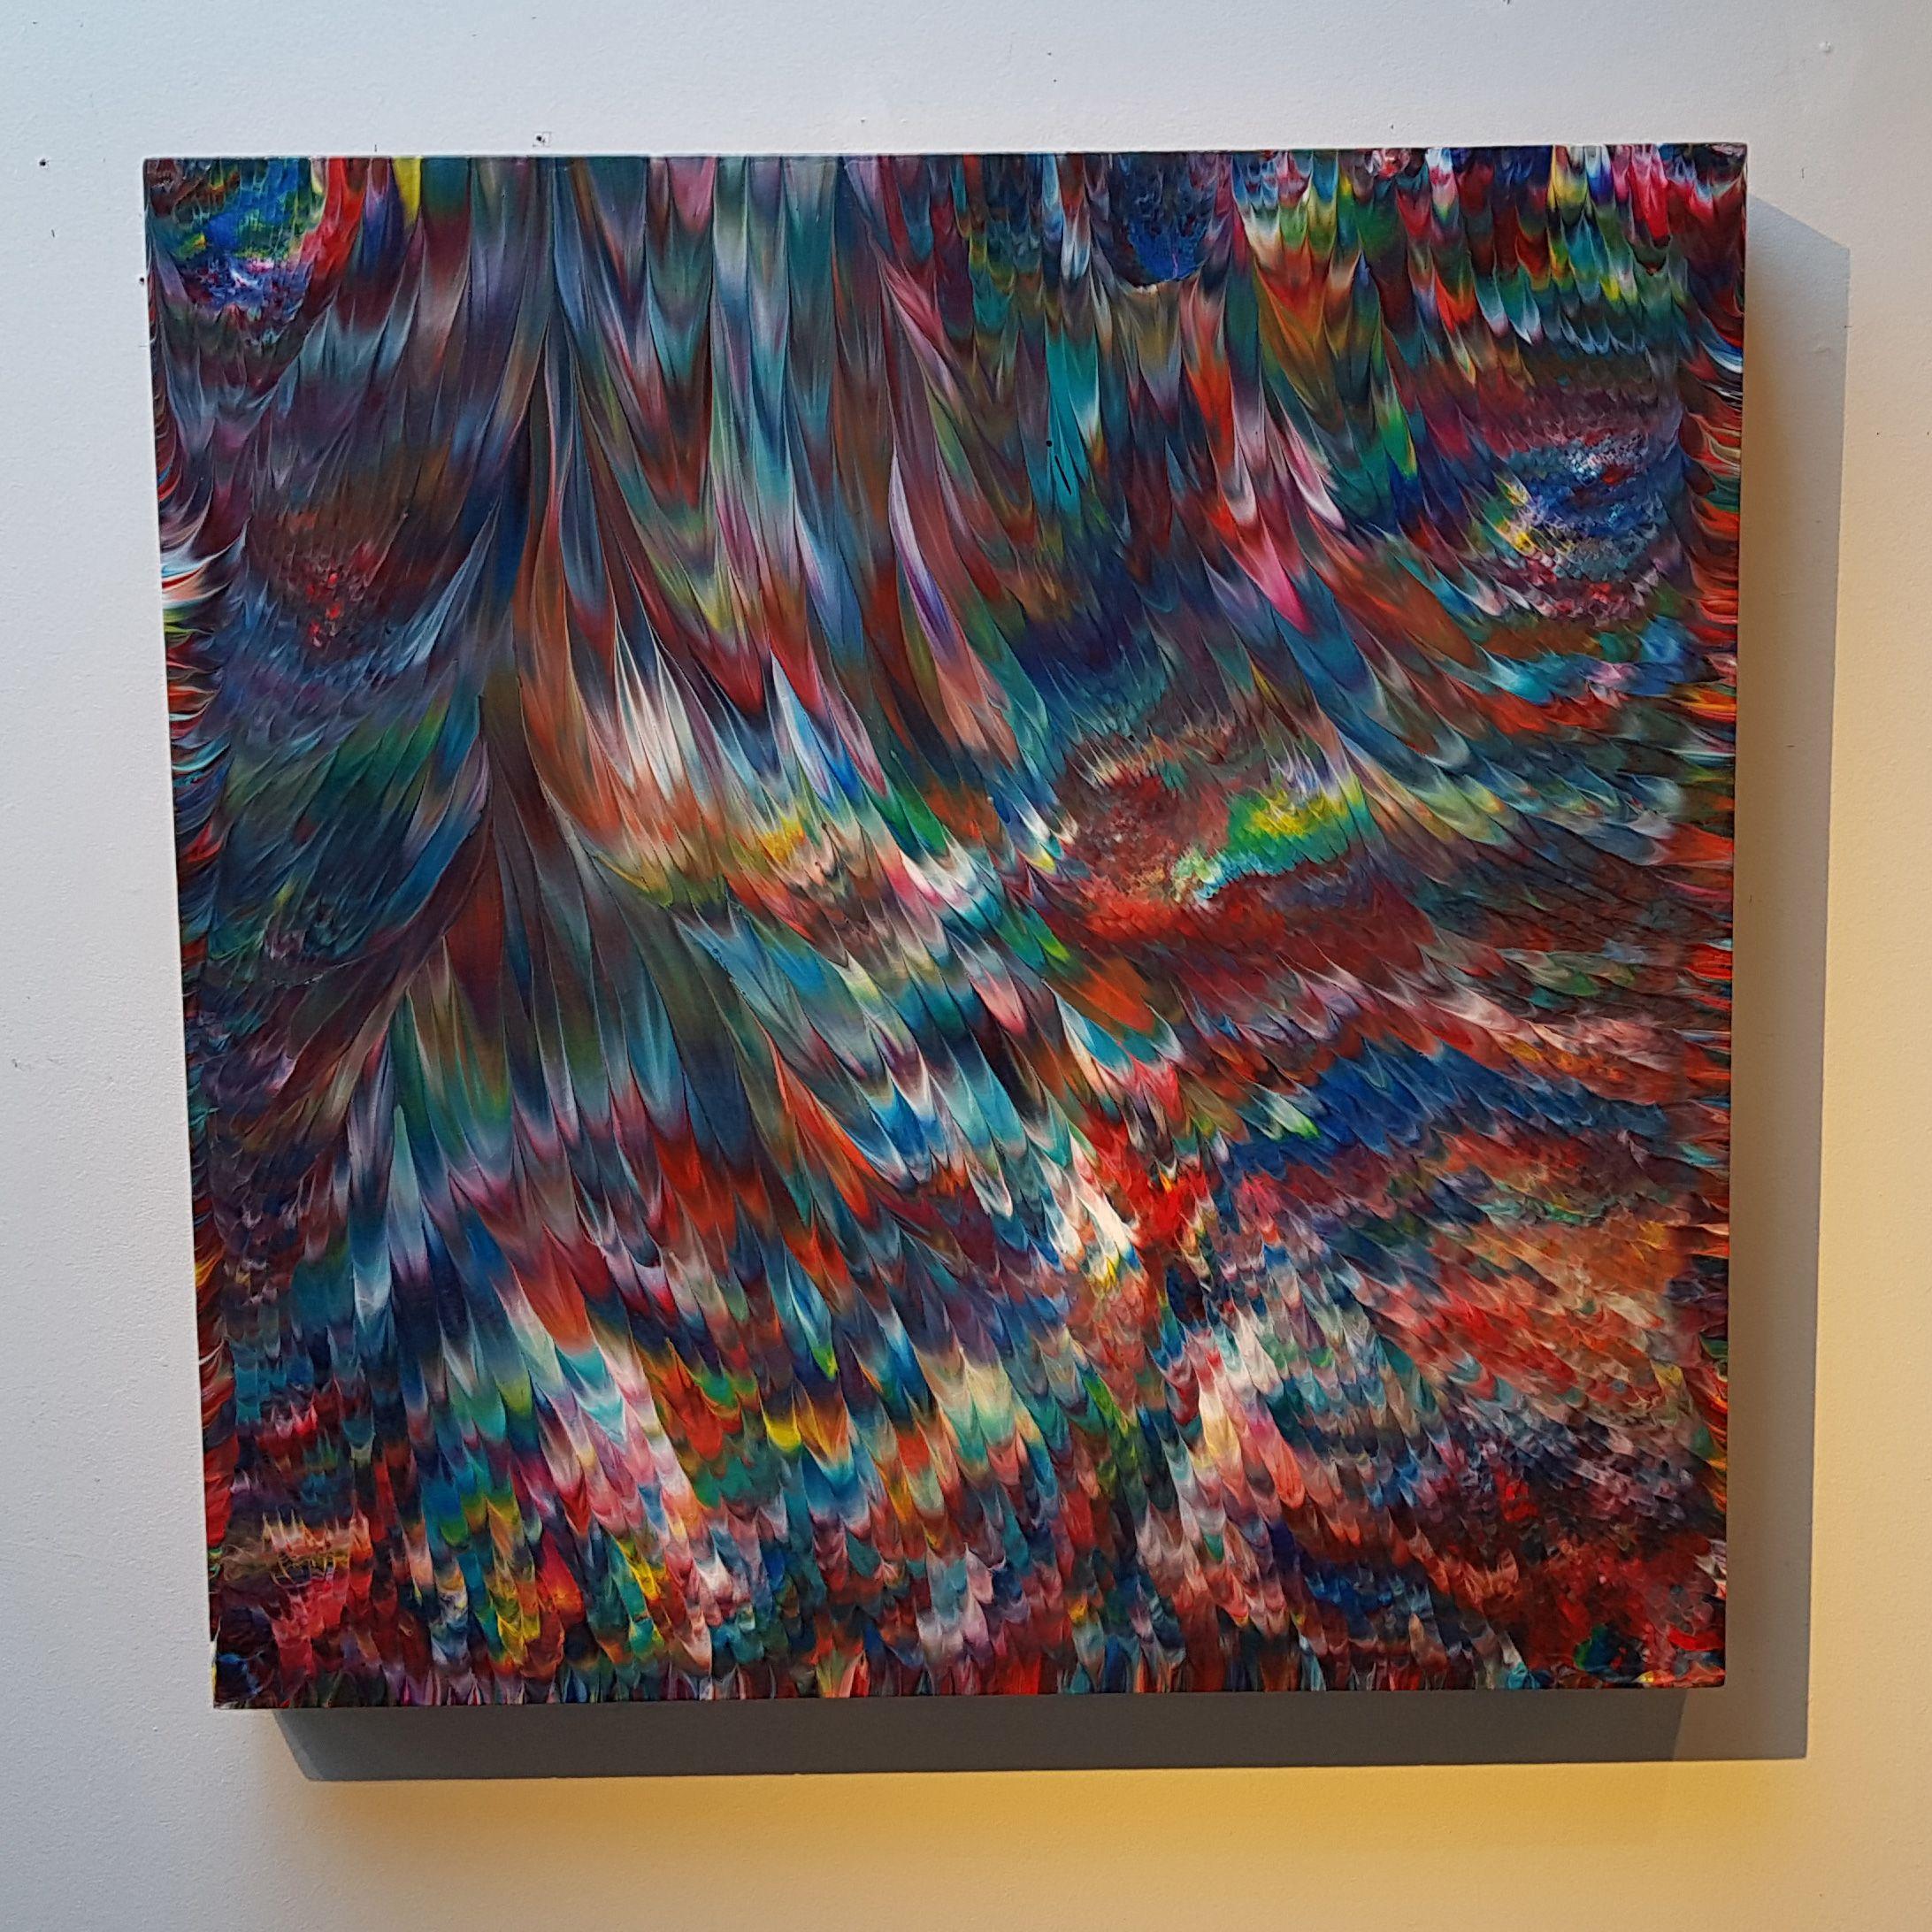 This beautiful textured abstract expressionism painting features a mix of beautiful dark blues, vibrant reds, oranges, turquoise, and many other gorgeous custom colors. This movement is inspired by waterfalls, and the high-gloss finish makes the